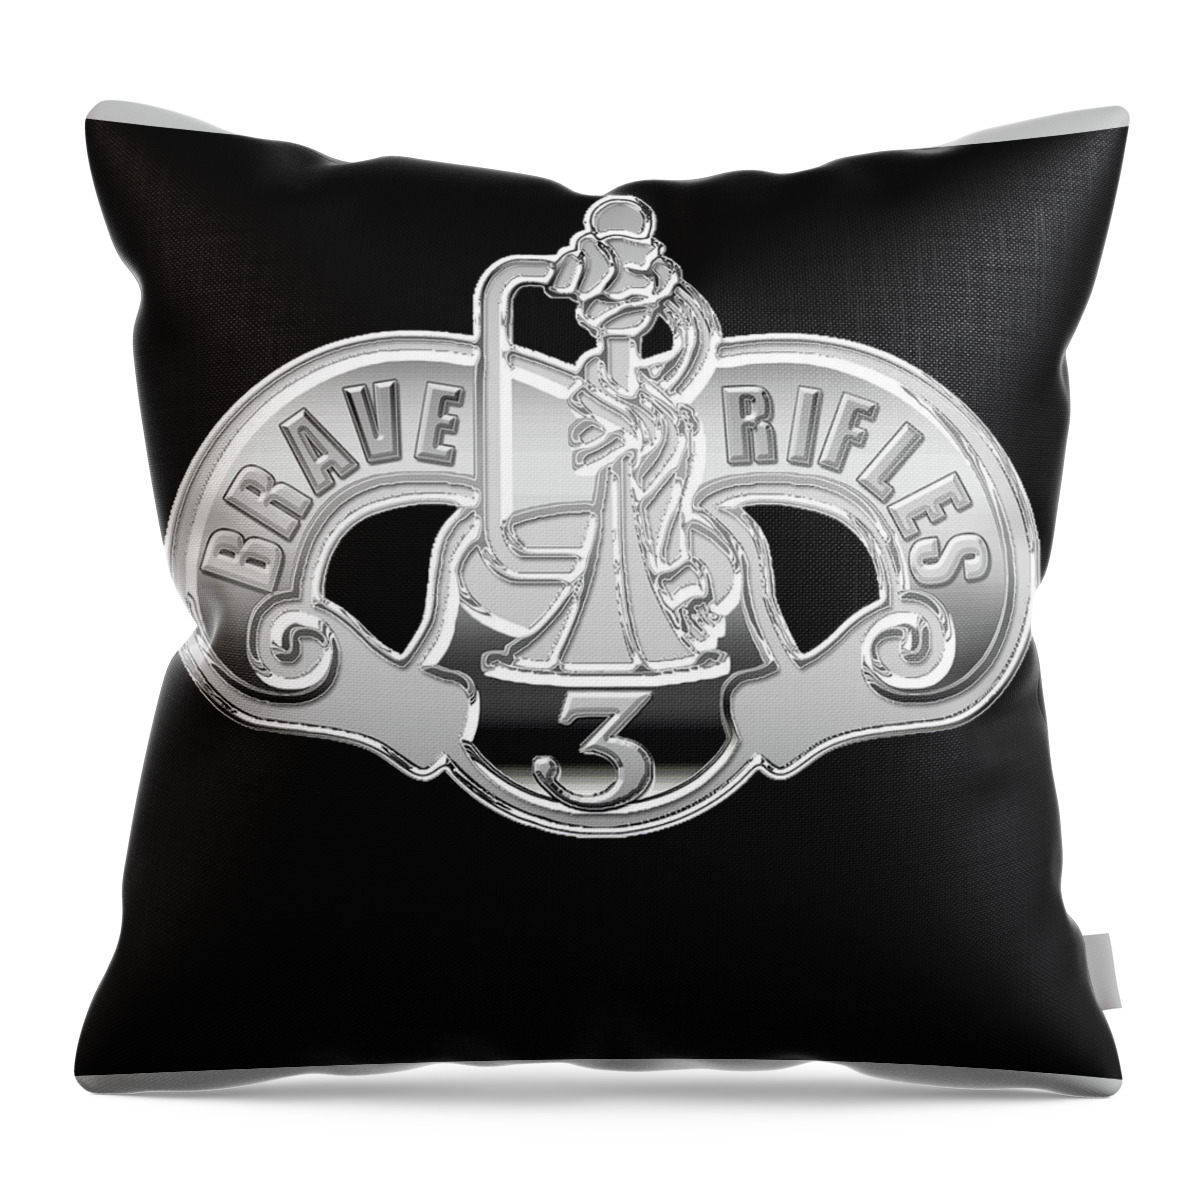 3 Acr Throw Pillow featuring the photograph 3 Acr by Nunweiler Photography